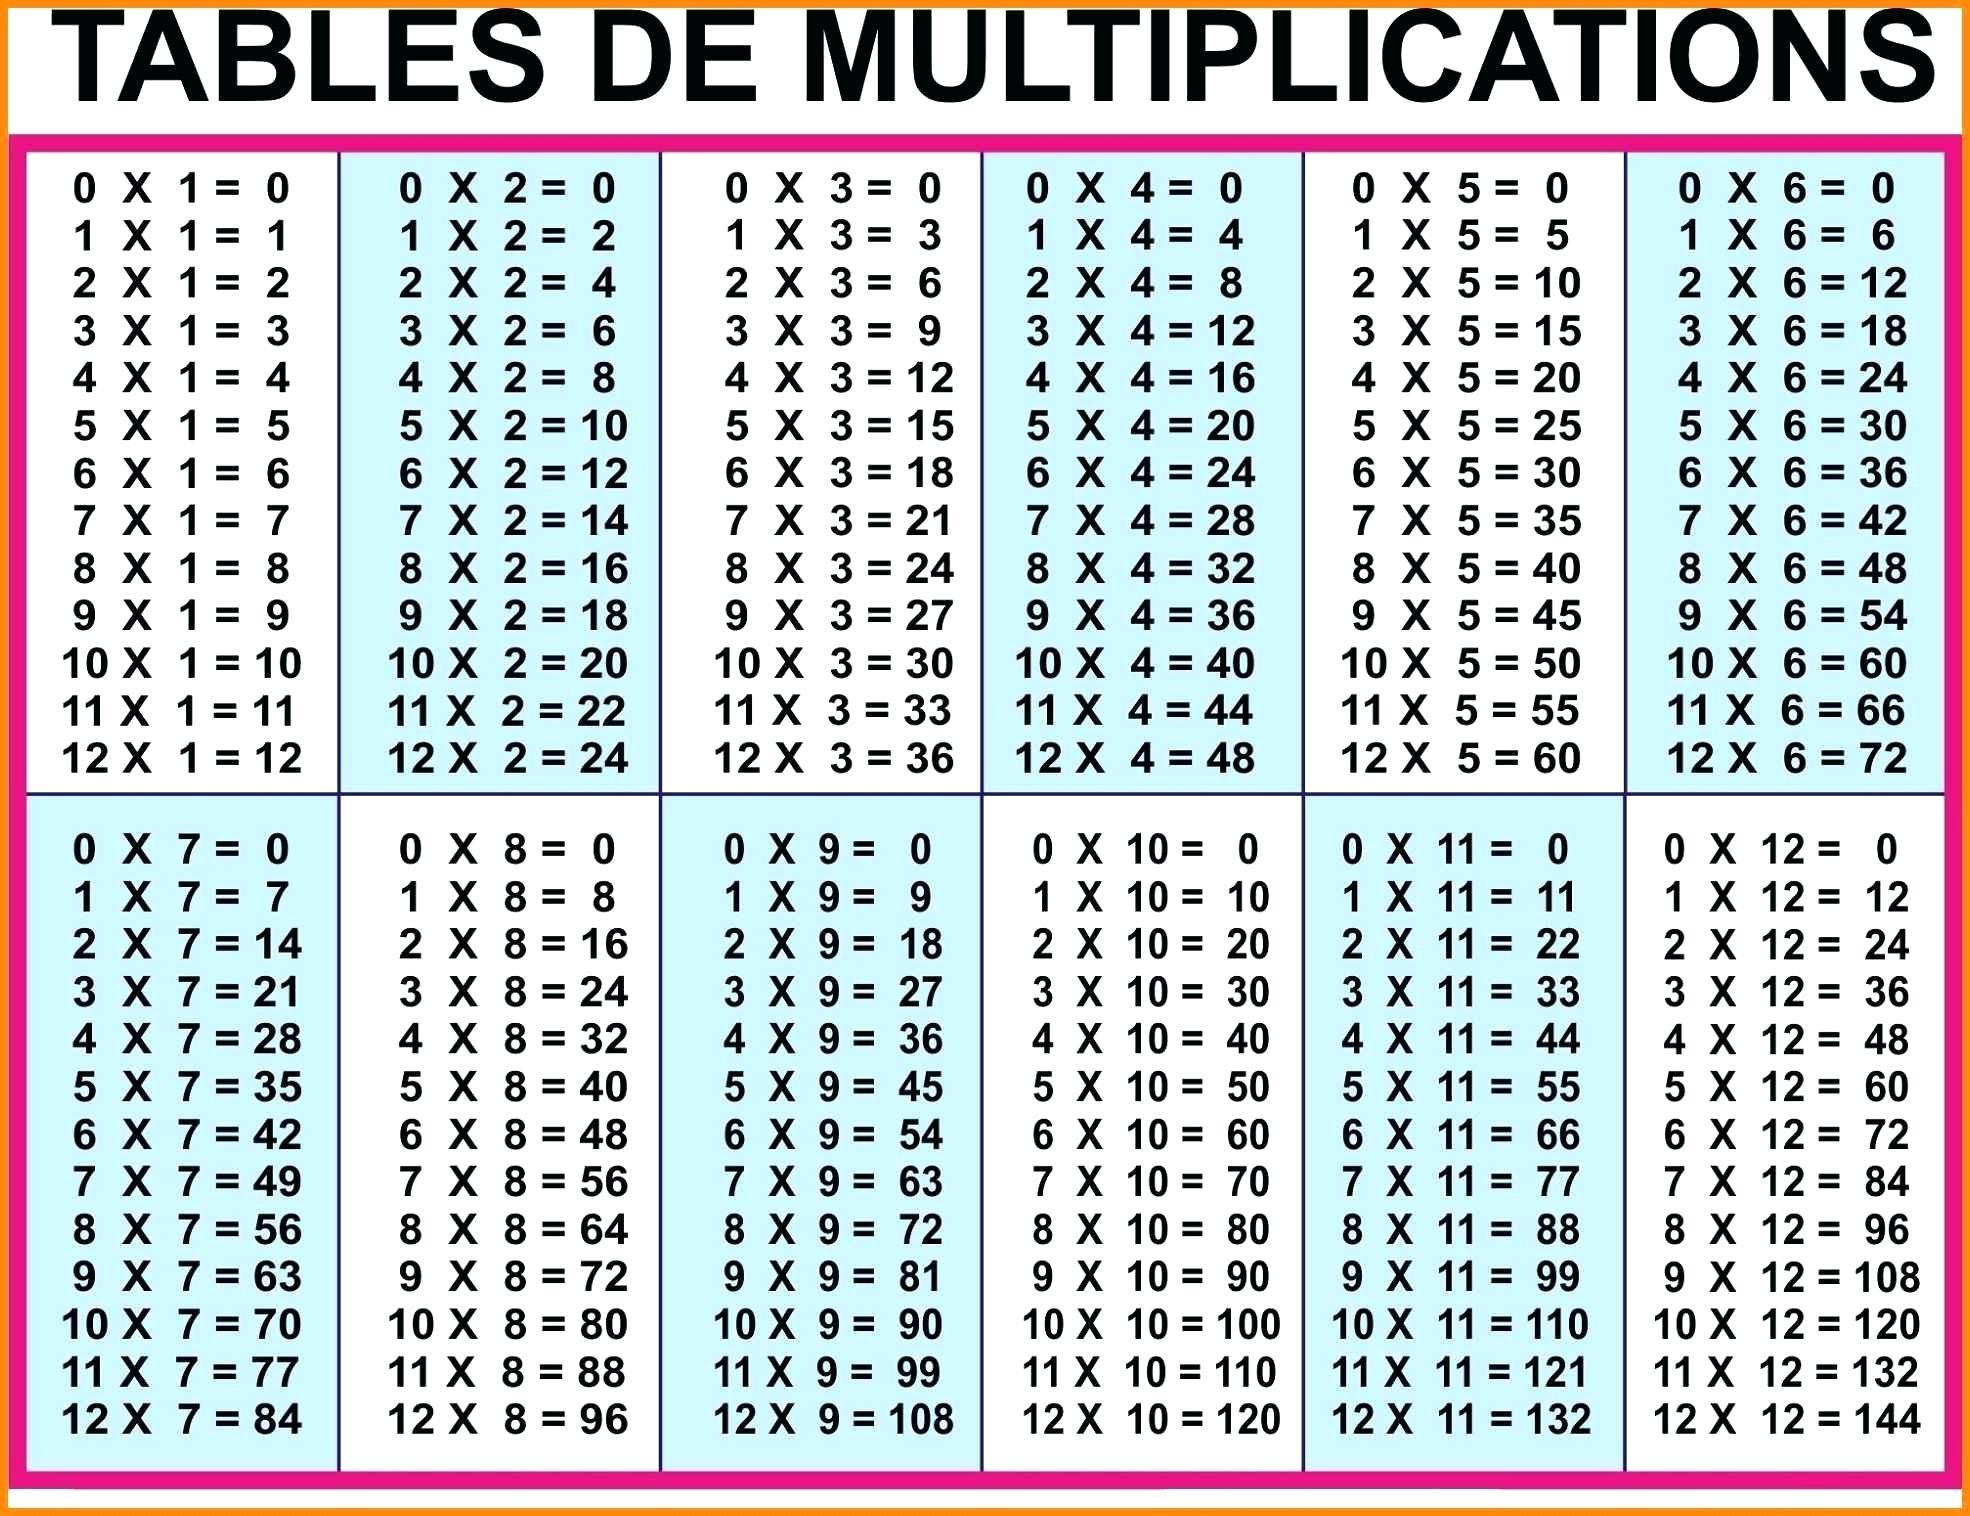 Multiplication Charts Printable That Are Eloquent | Katrina Blog inside Printable Multiplication Chart For Desk